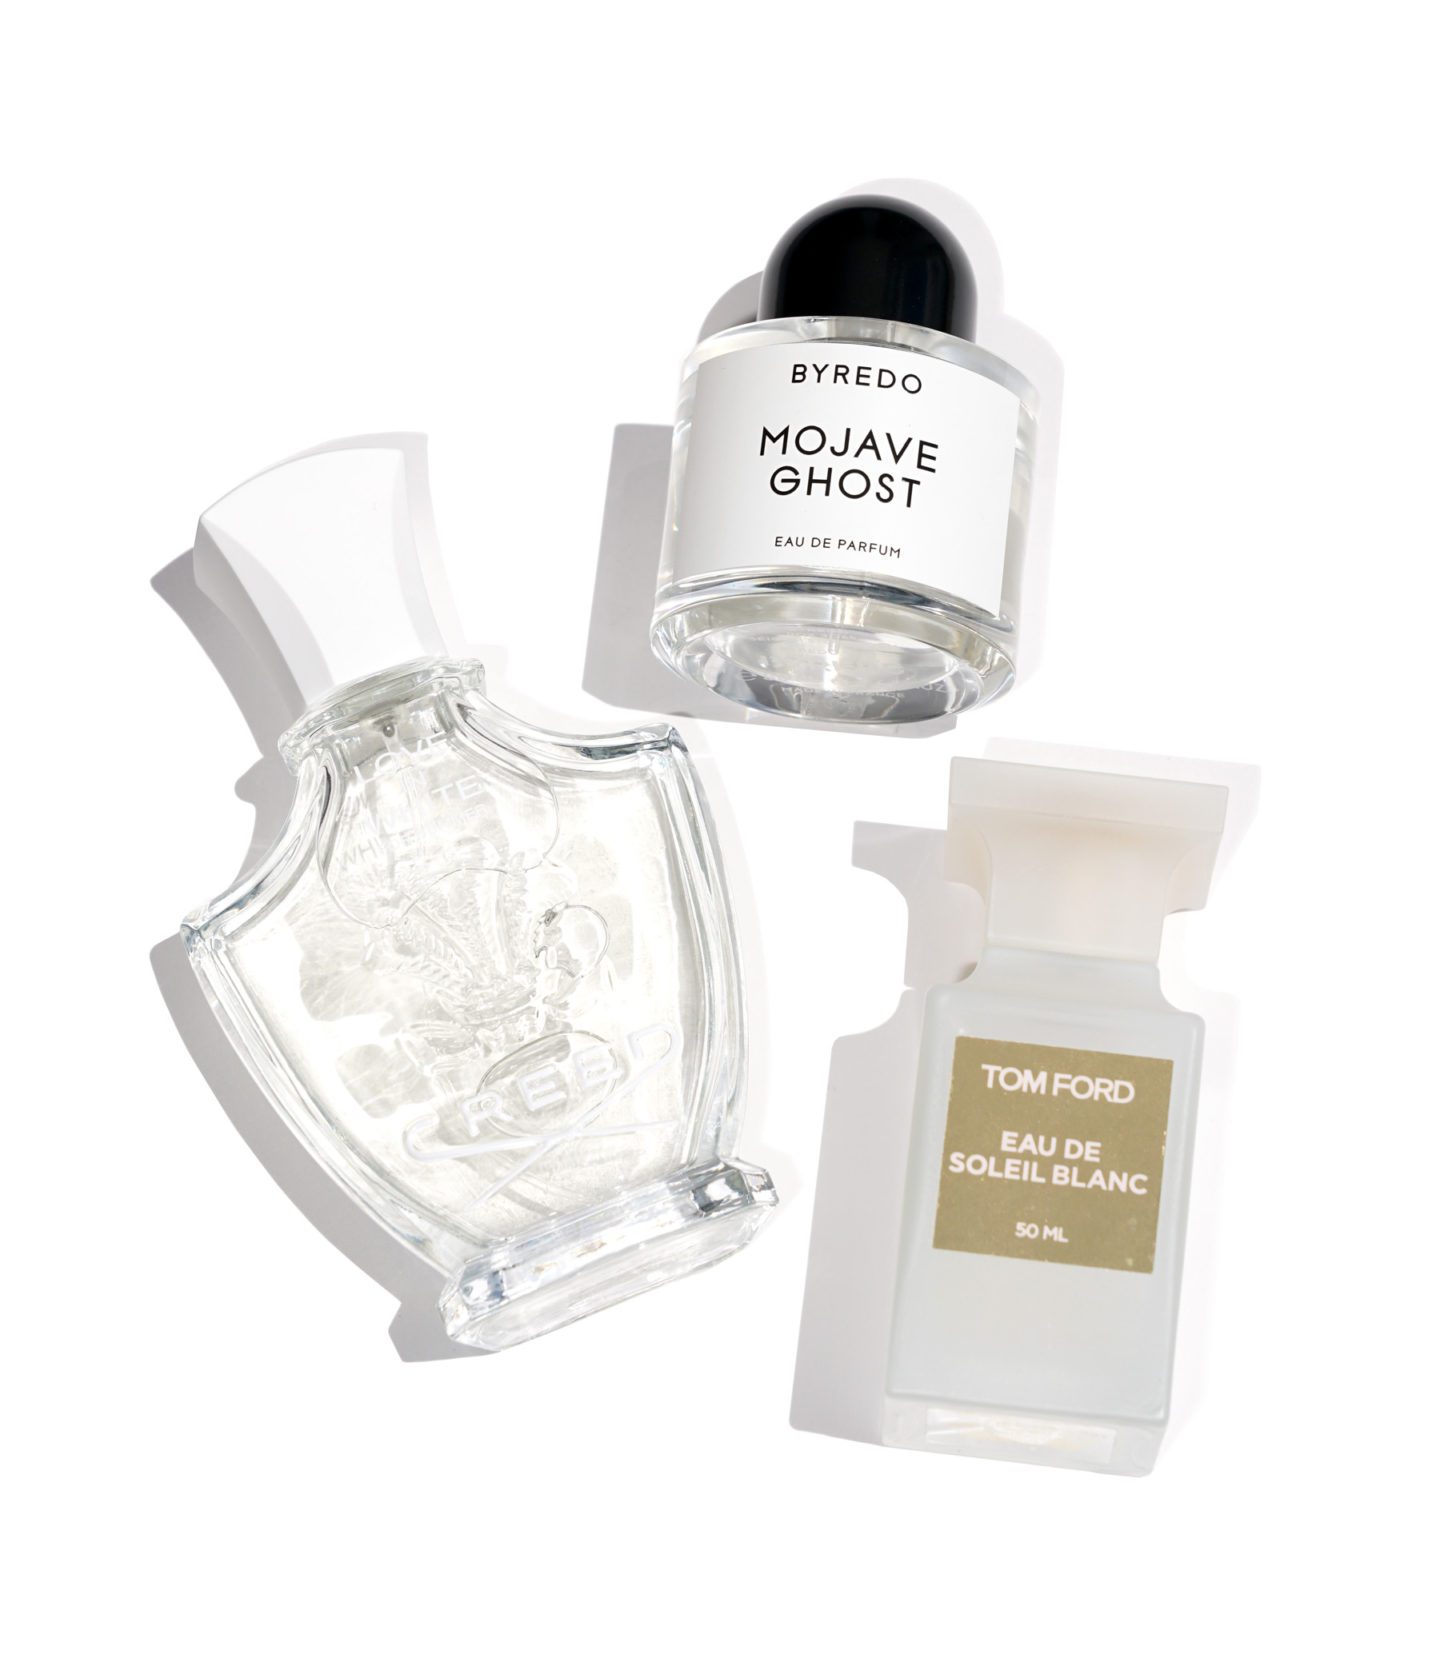 Creed Love in White for Summer, Byredo Mojave Ghost and Tom Ford Eau de Soleil Blanc